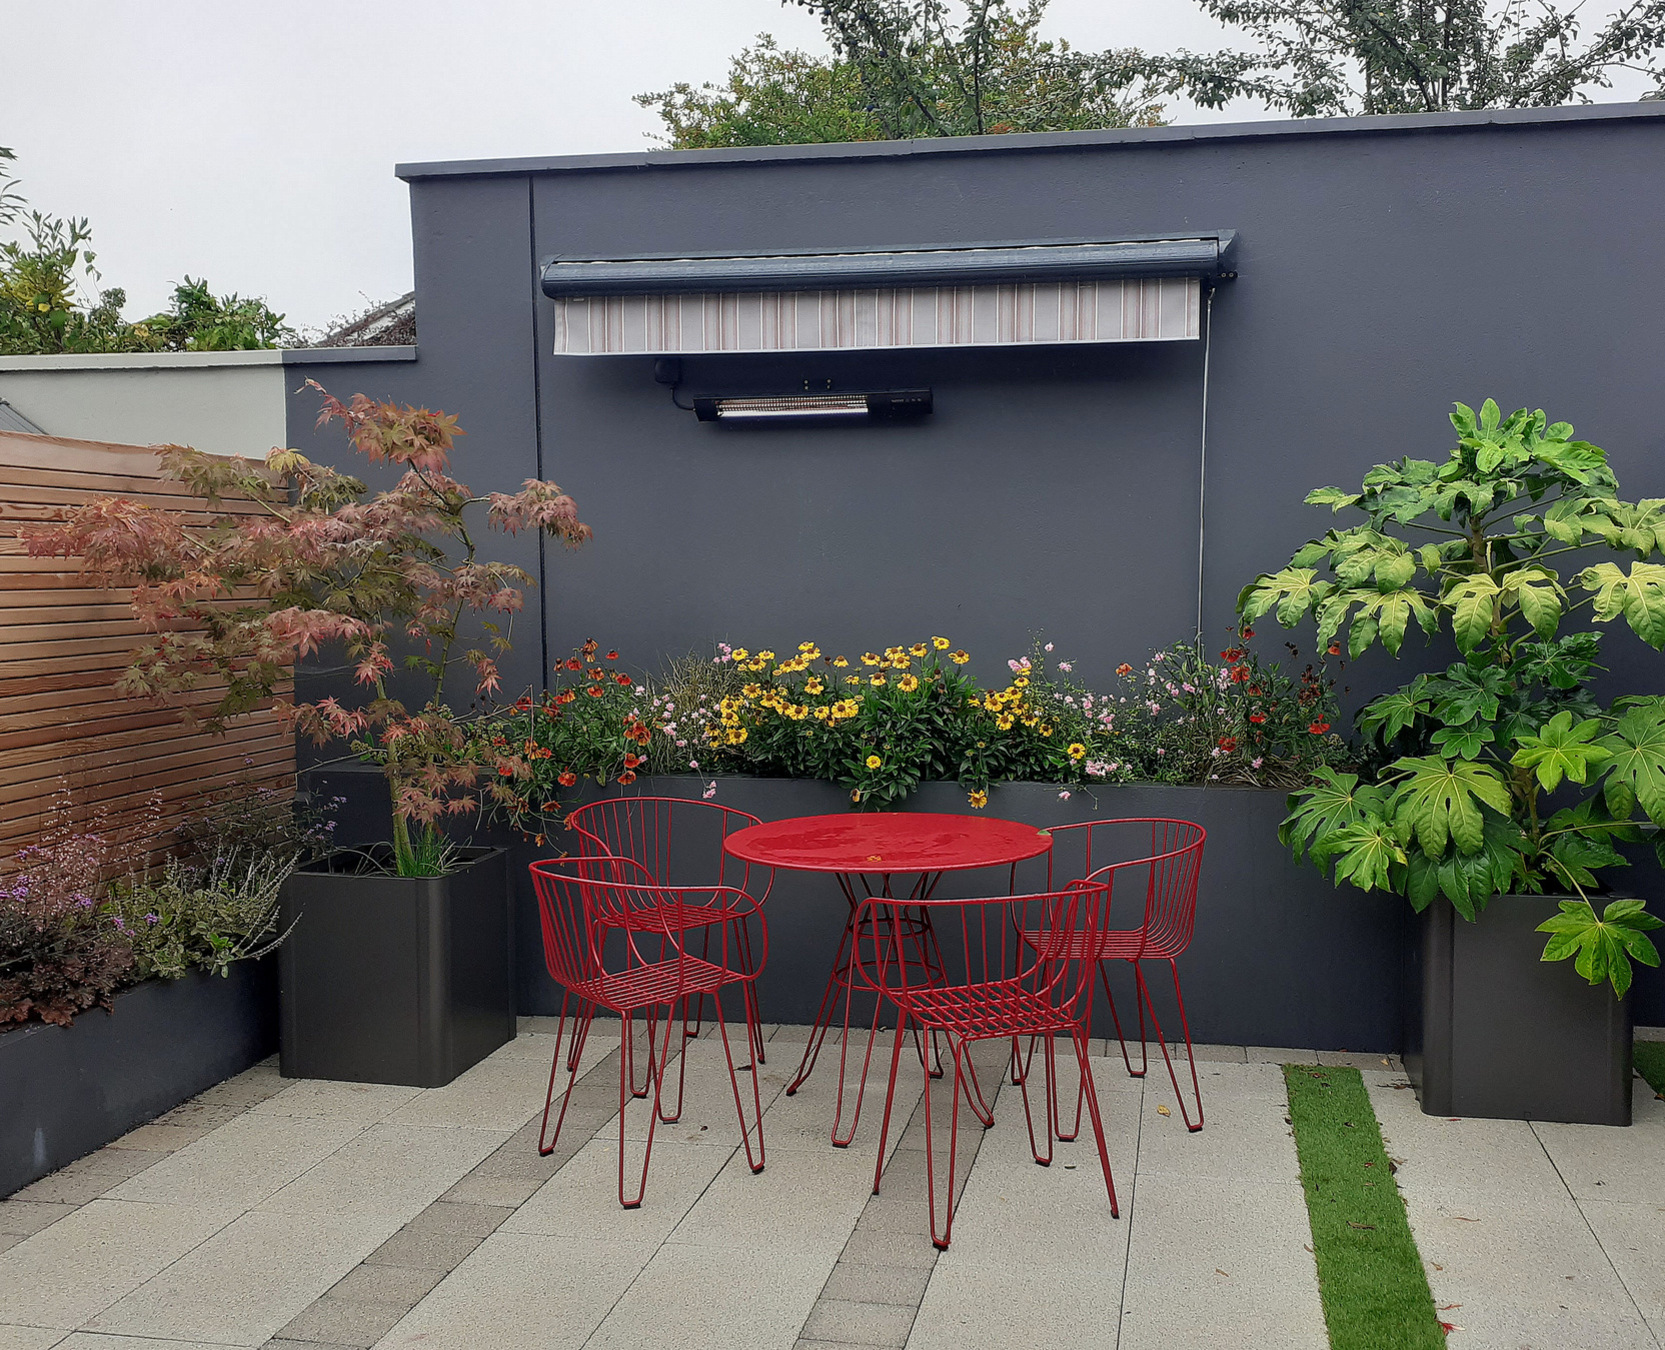 Biohort Belvedere Planters used in small spaces, to create colour, impact and stimulation | Dundrum, Dublin 18